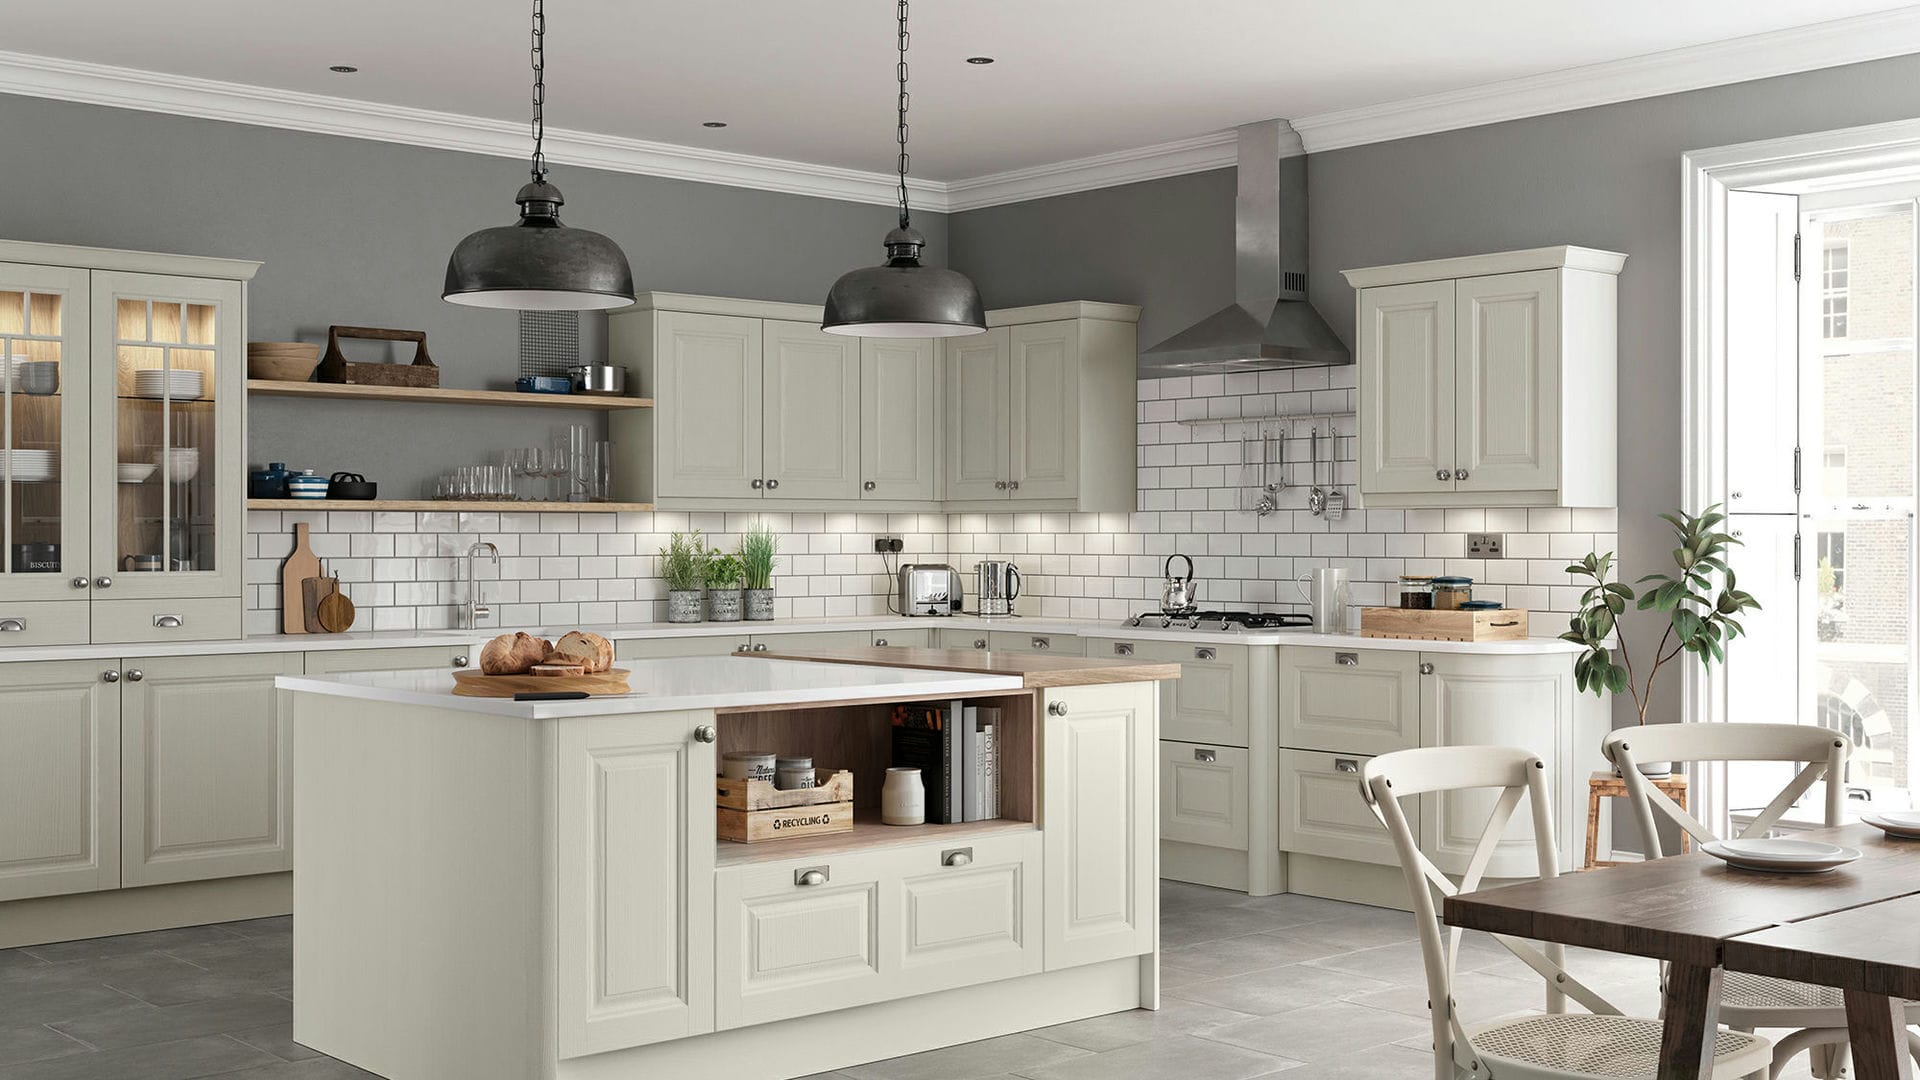 Jefferson solid wood stone kitchens combining strength and rustic charm with a natural stone appearance